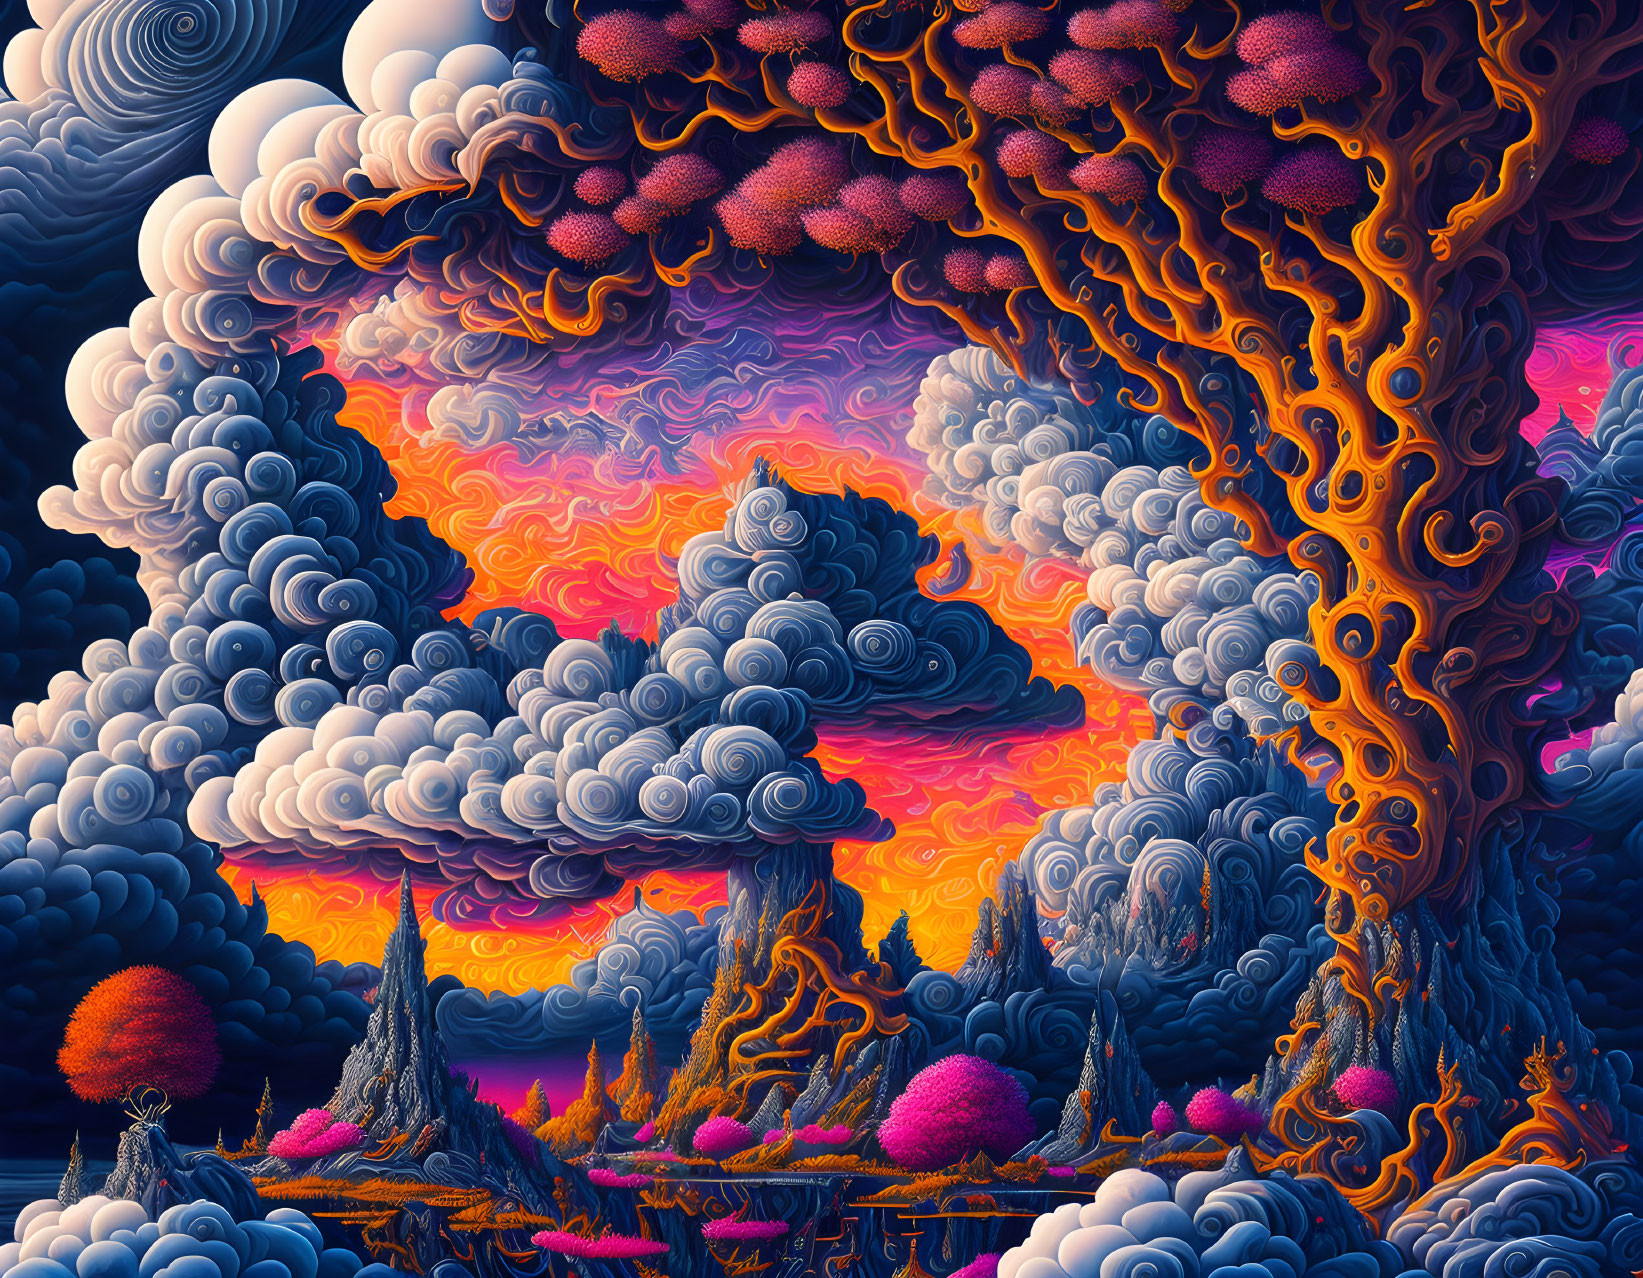 Surrealist landscape with swirling clouds and vibrant colors